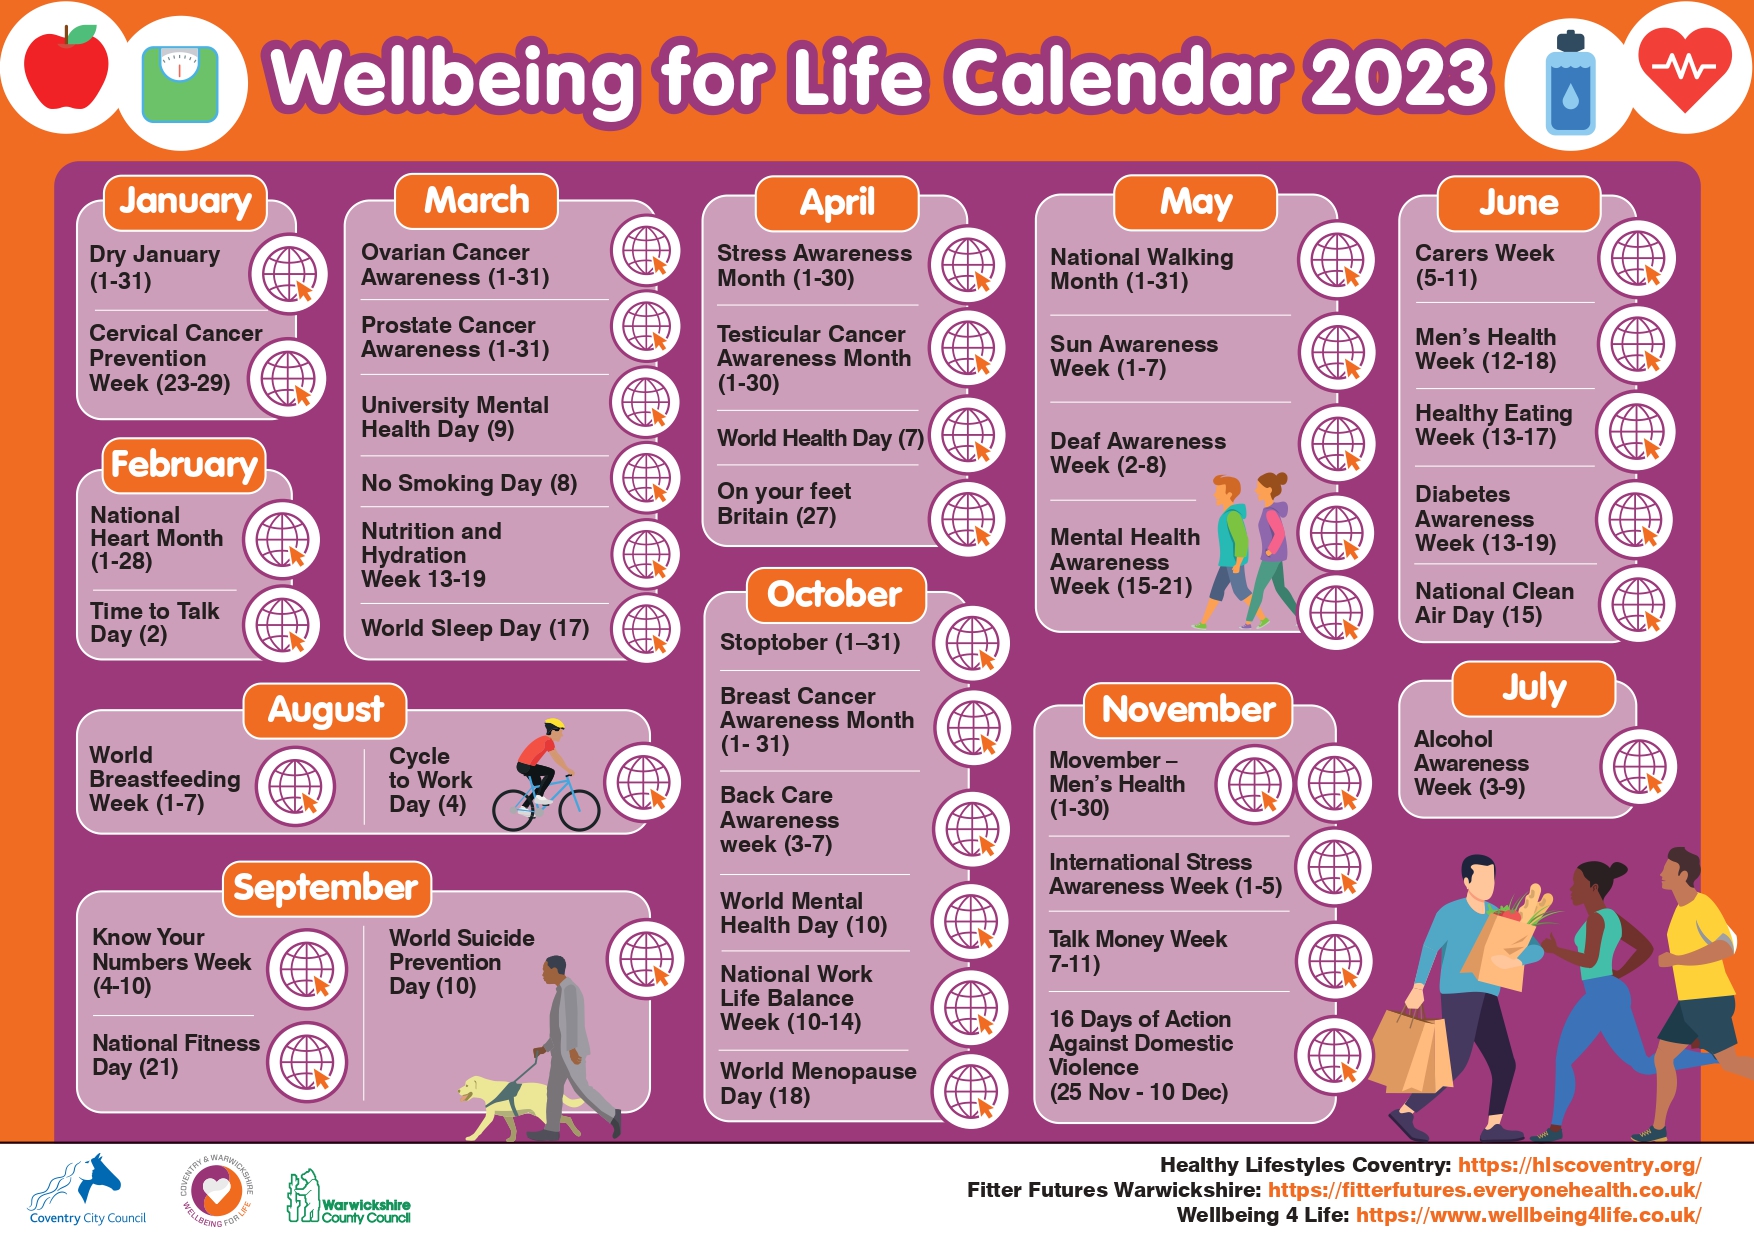 wellbeing-events-calendar-wellbeing-for-life